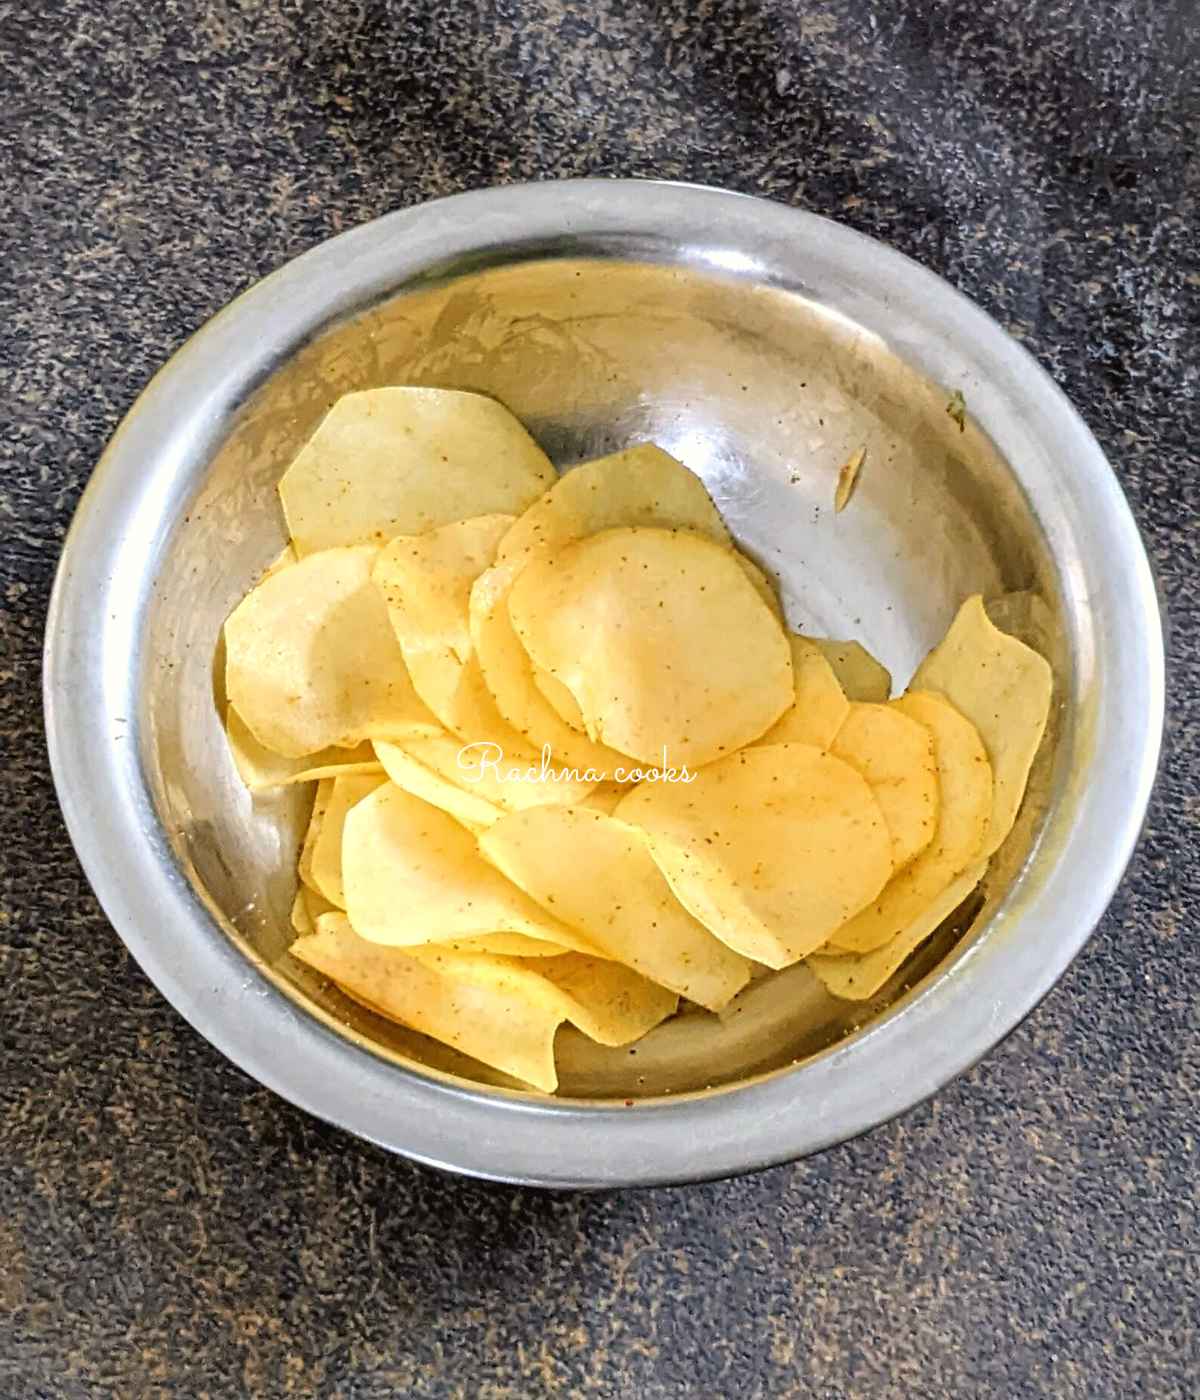 Potato slices tossed with oil and seasonings.